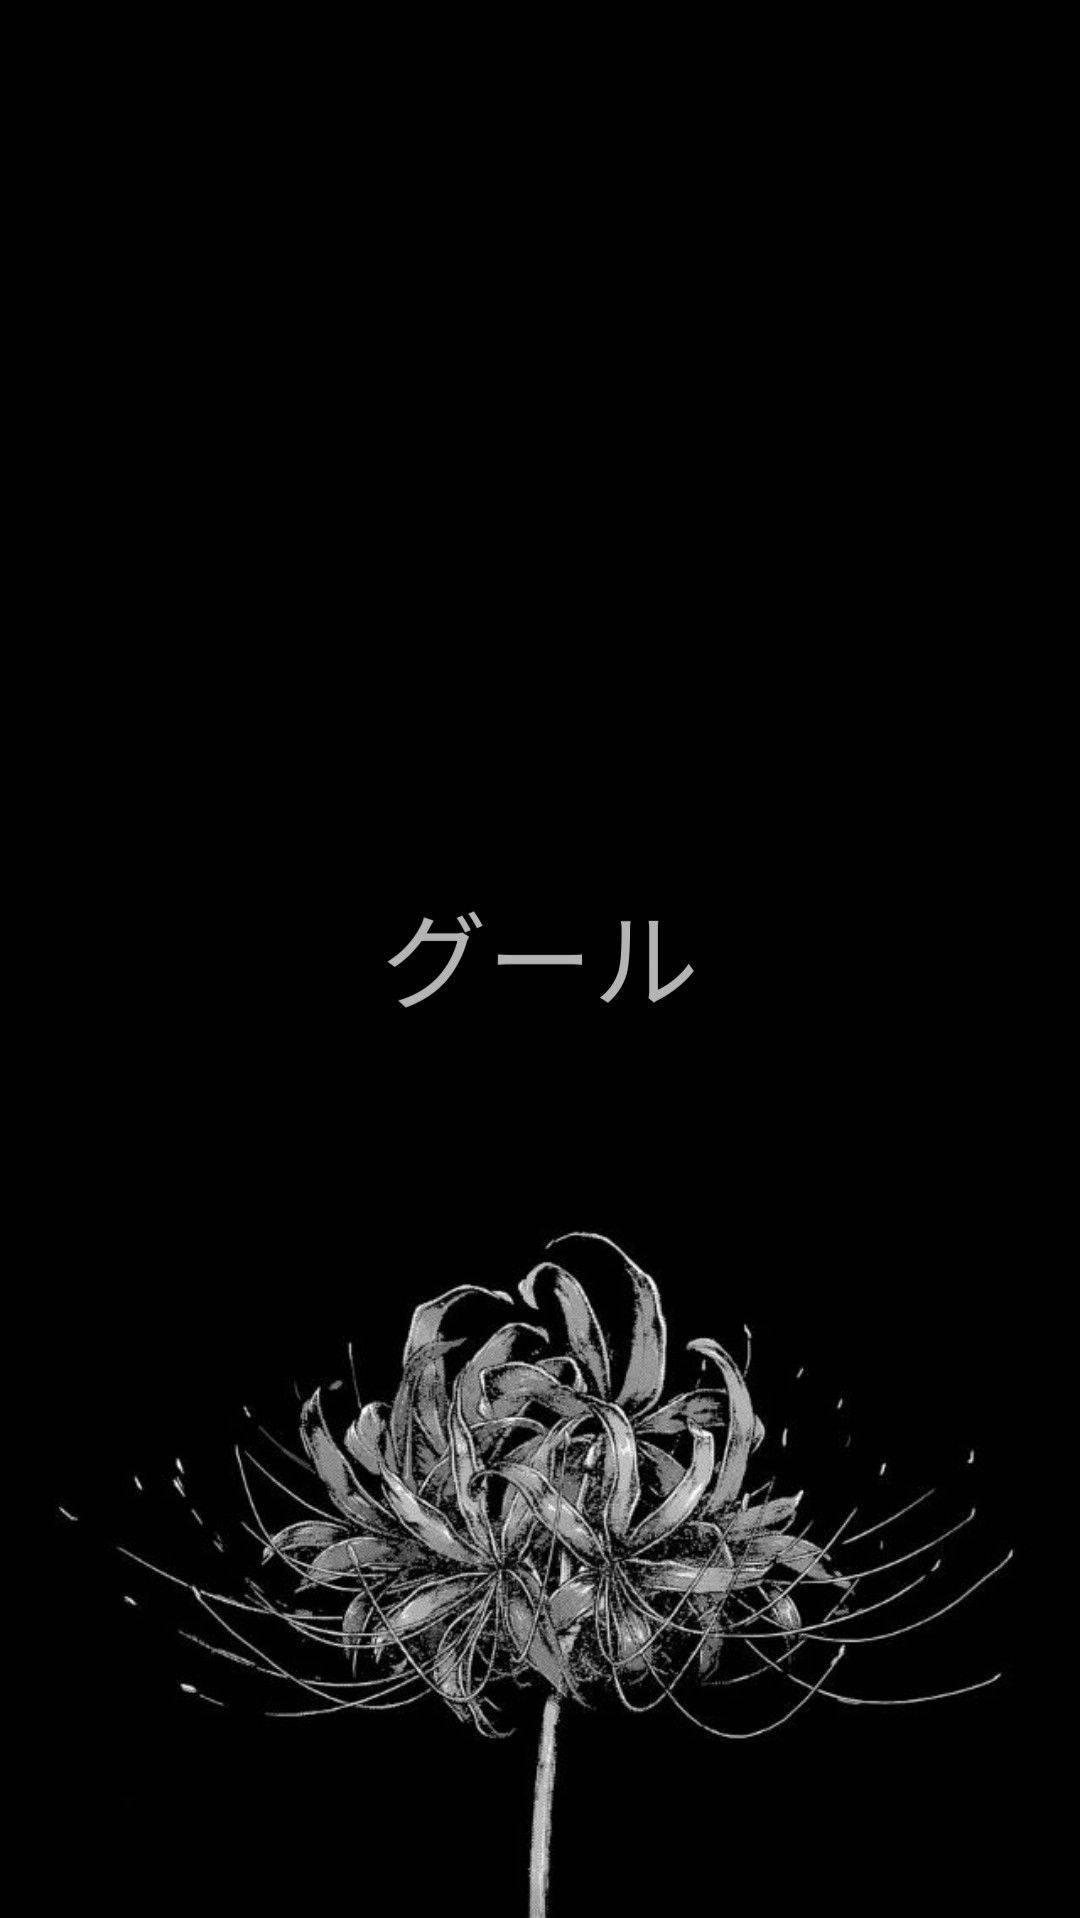 Tokyo Ghoul Aesthetic With A Wilting Flower Wallpaper